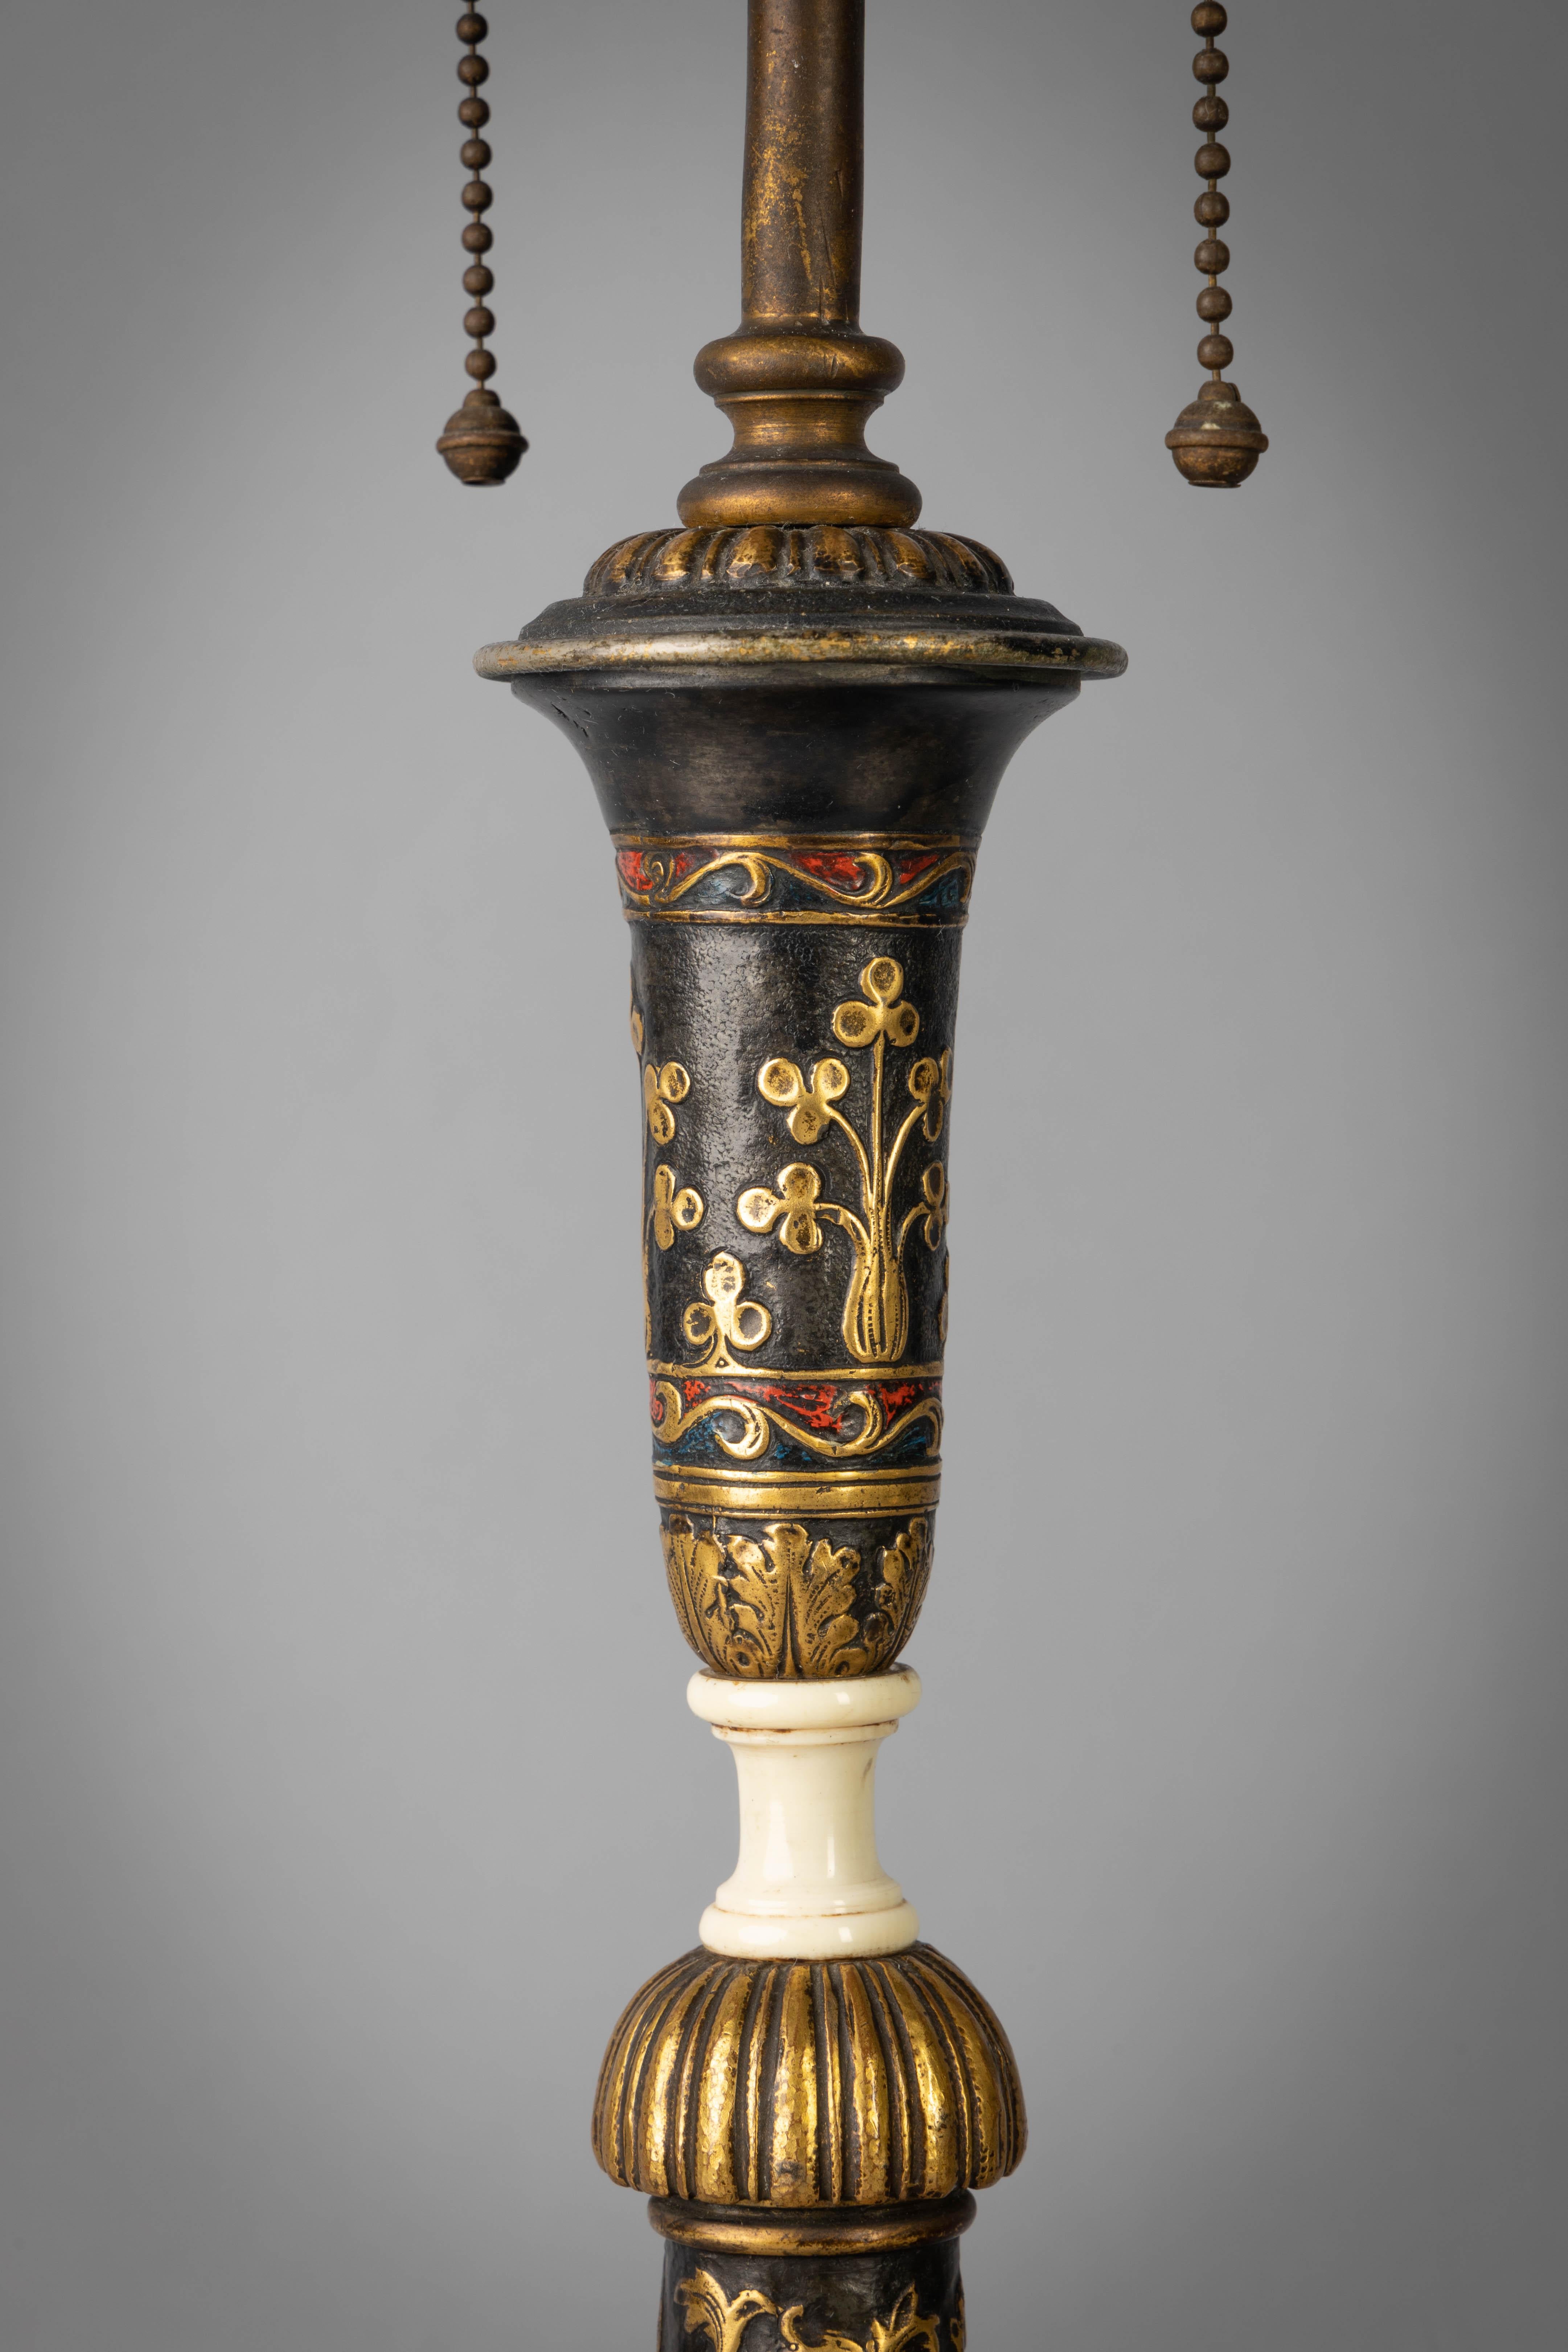 Pair of large gilt, patinated and enameled bronze candlestick lamps, E.F. Caldwell, circa 1900

In renaissance style with kings and queens at various pursuits amidst interlacing scroll and foliage decoration.